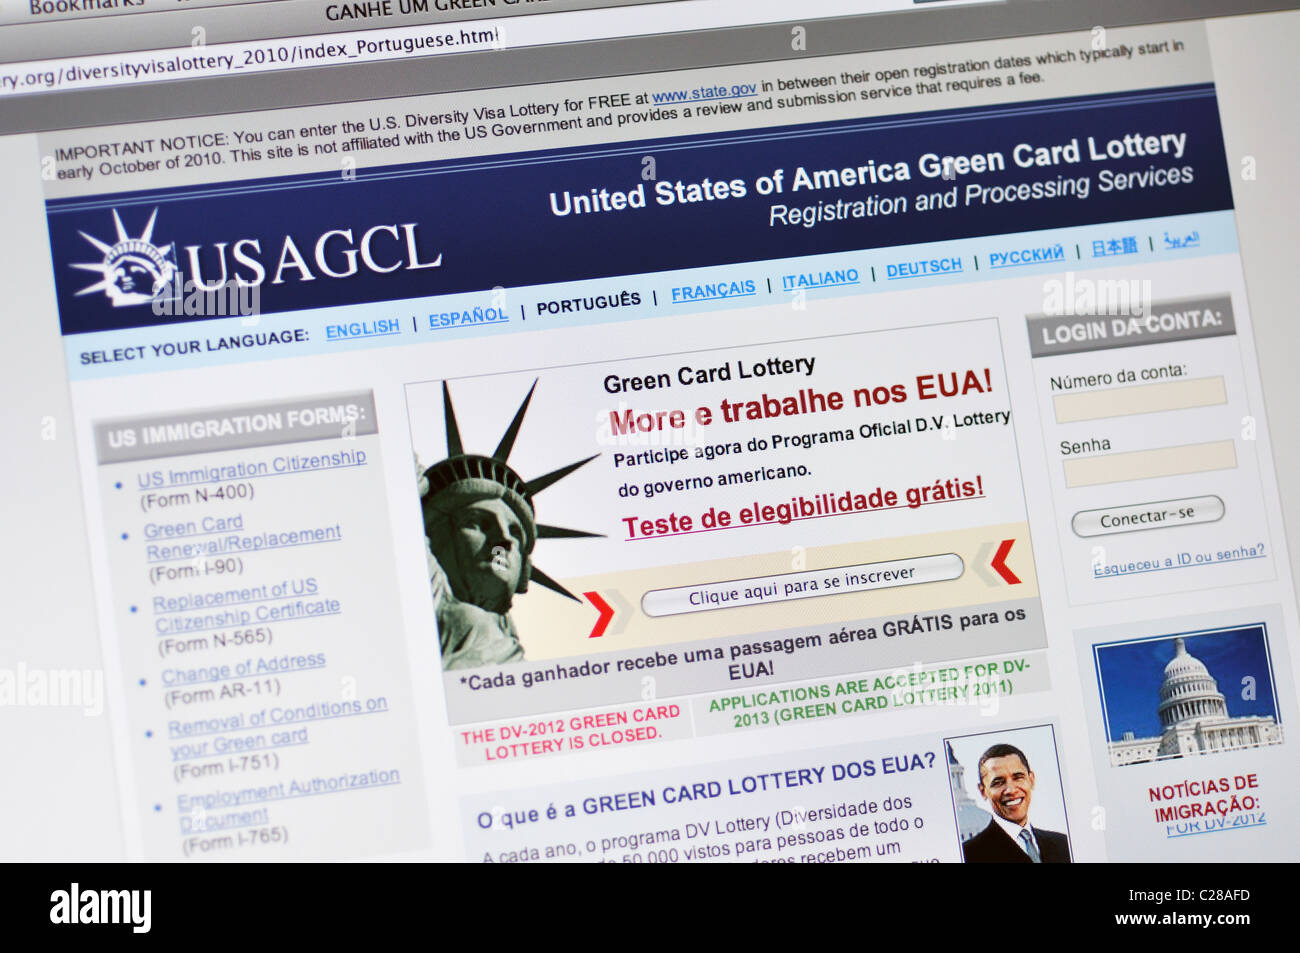 USAGCL website - United States of America Green Card Lottery - in Portuguese Stock Photo